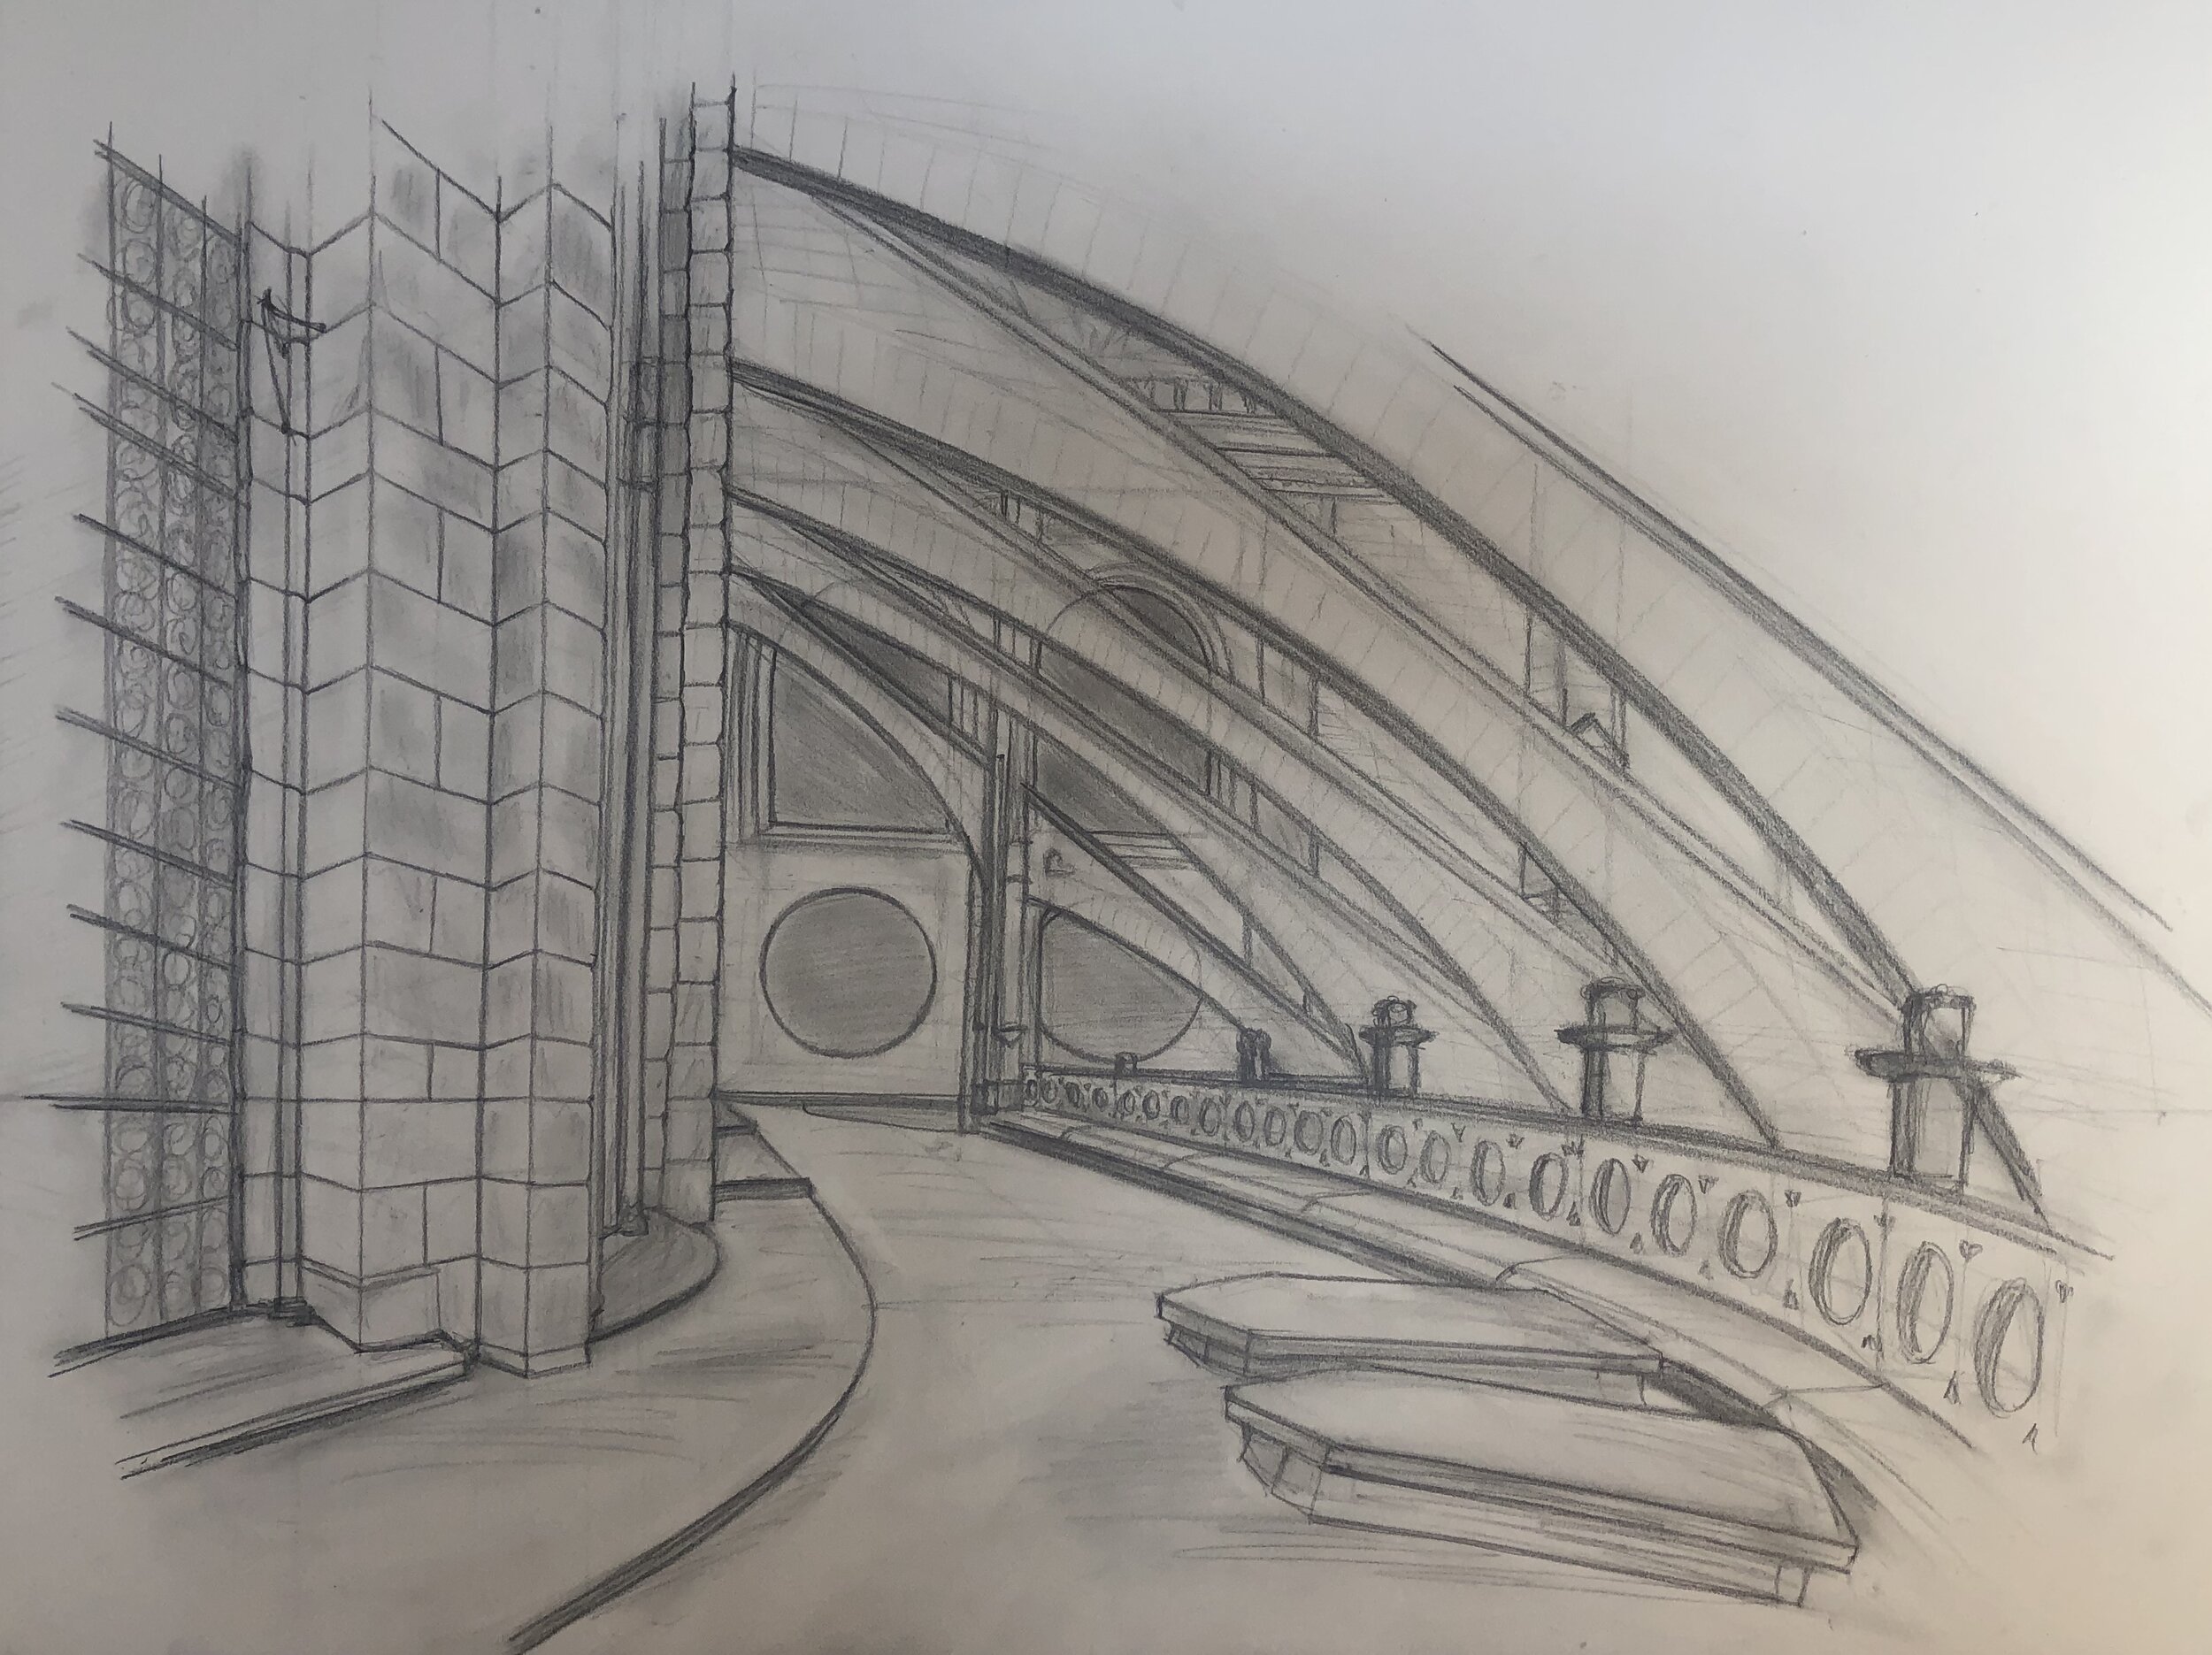 FREEHAND PERSPECTIVE DRAWING